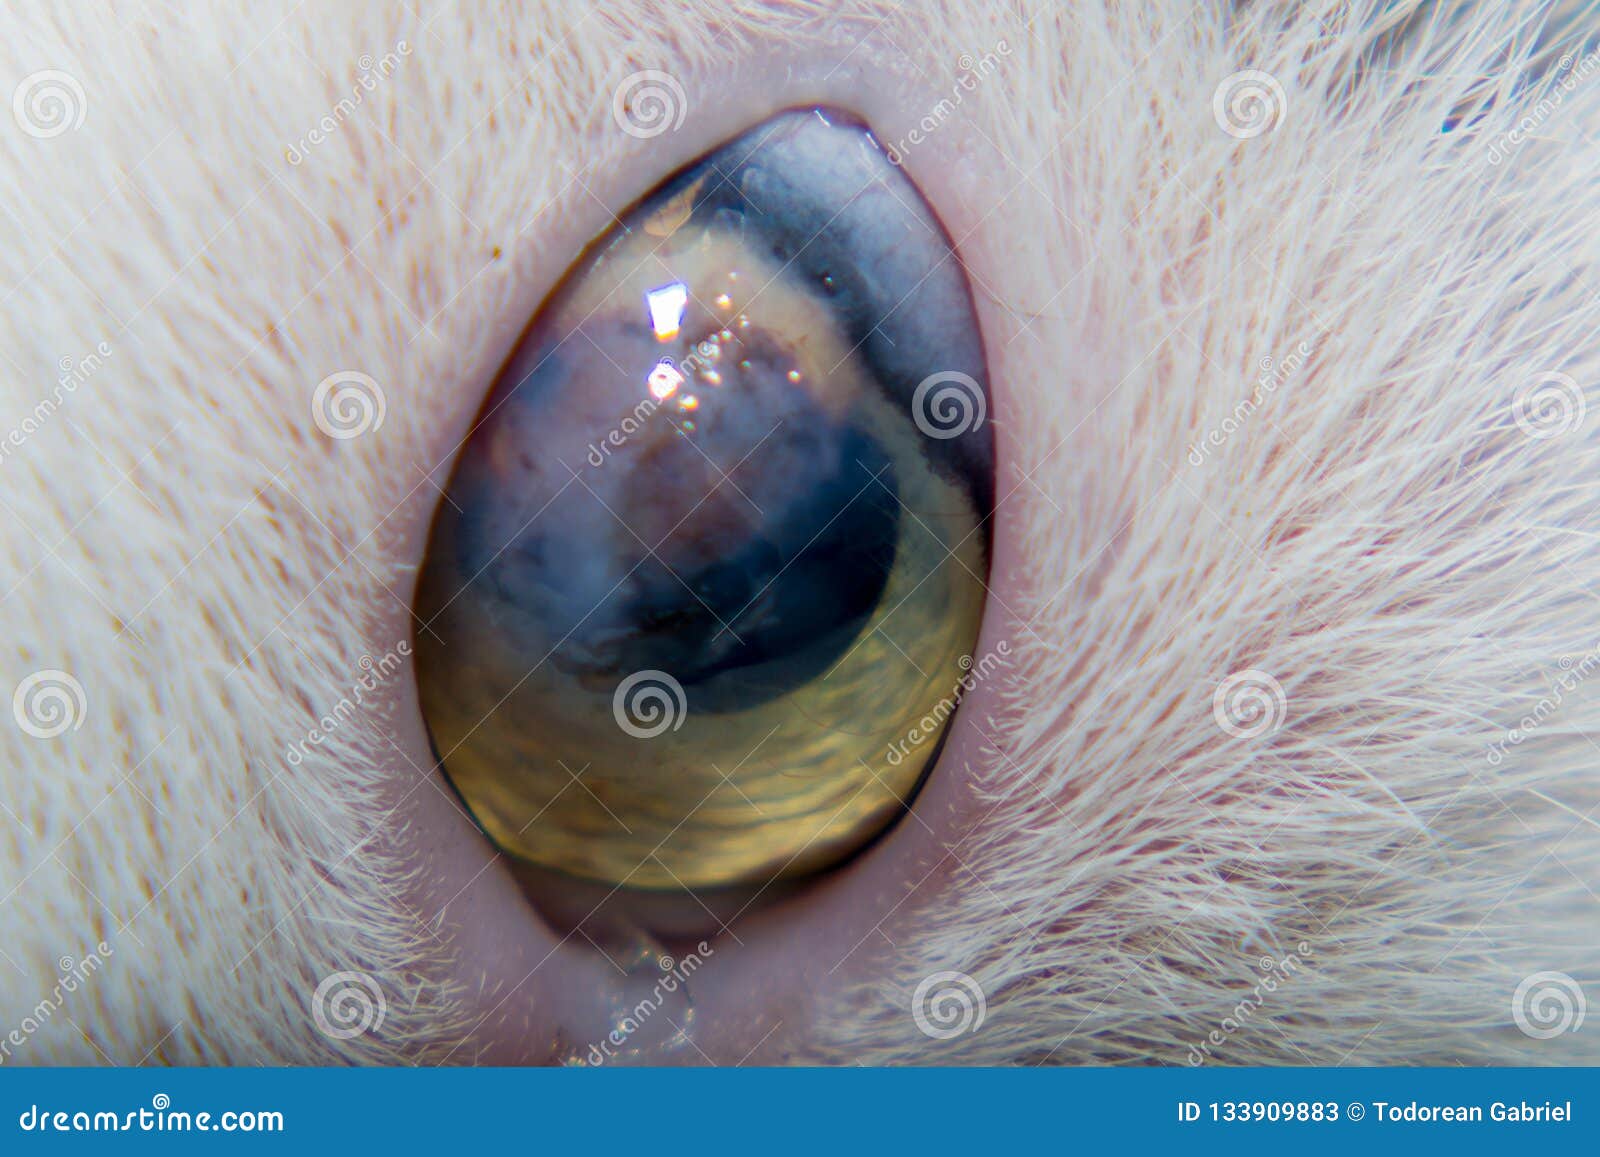 Adult Cat With Corneal Ulcer Stock Image Image of adult, disease